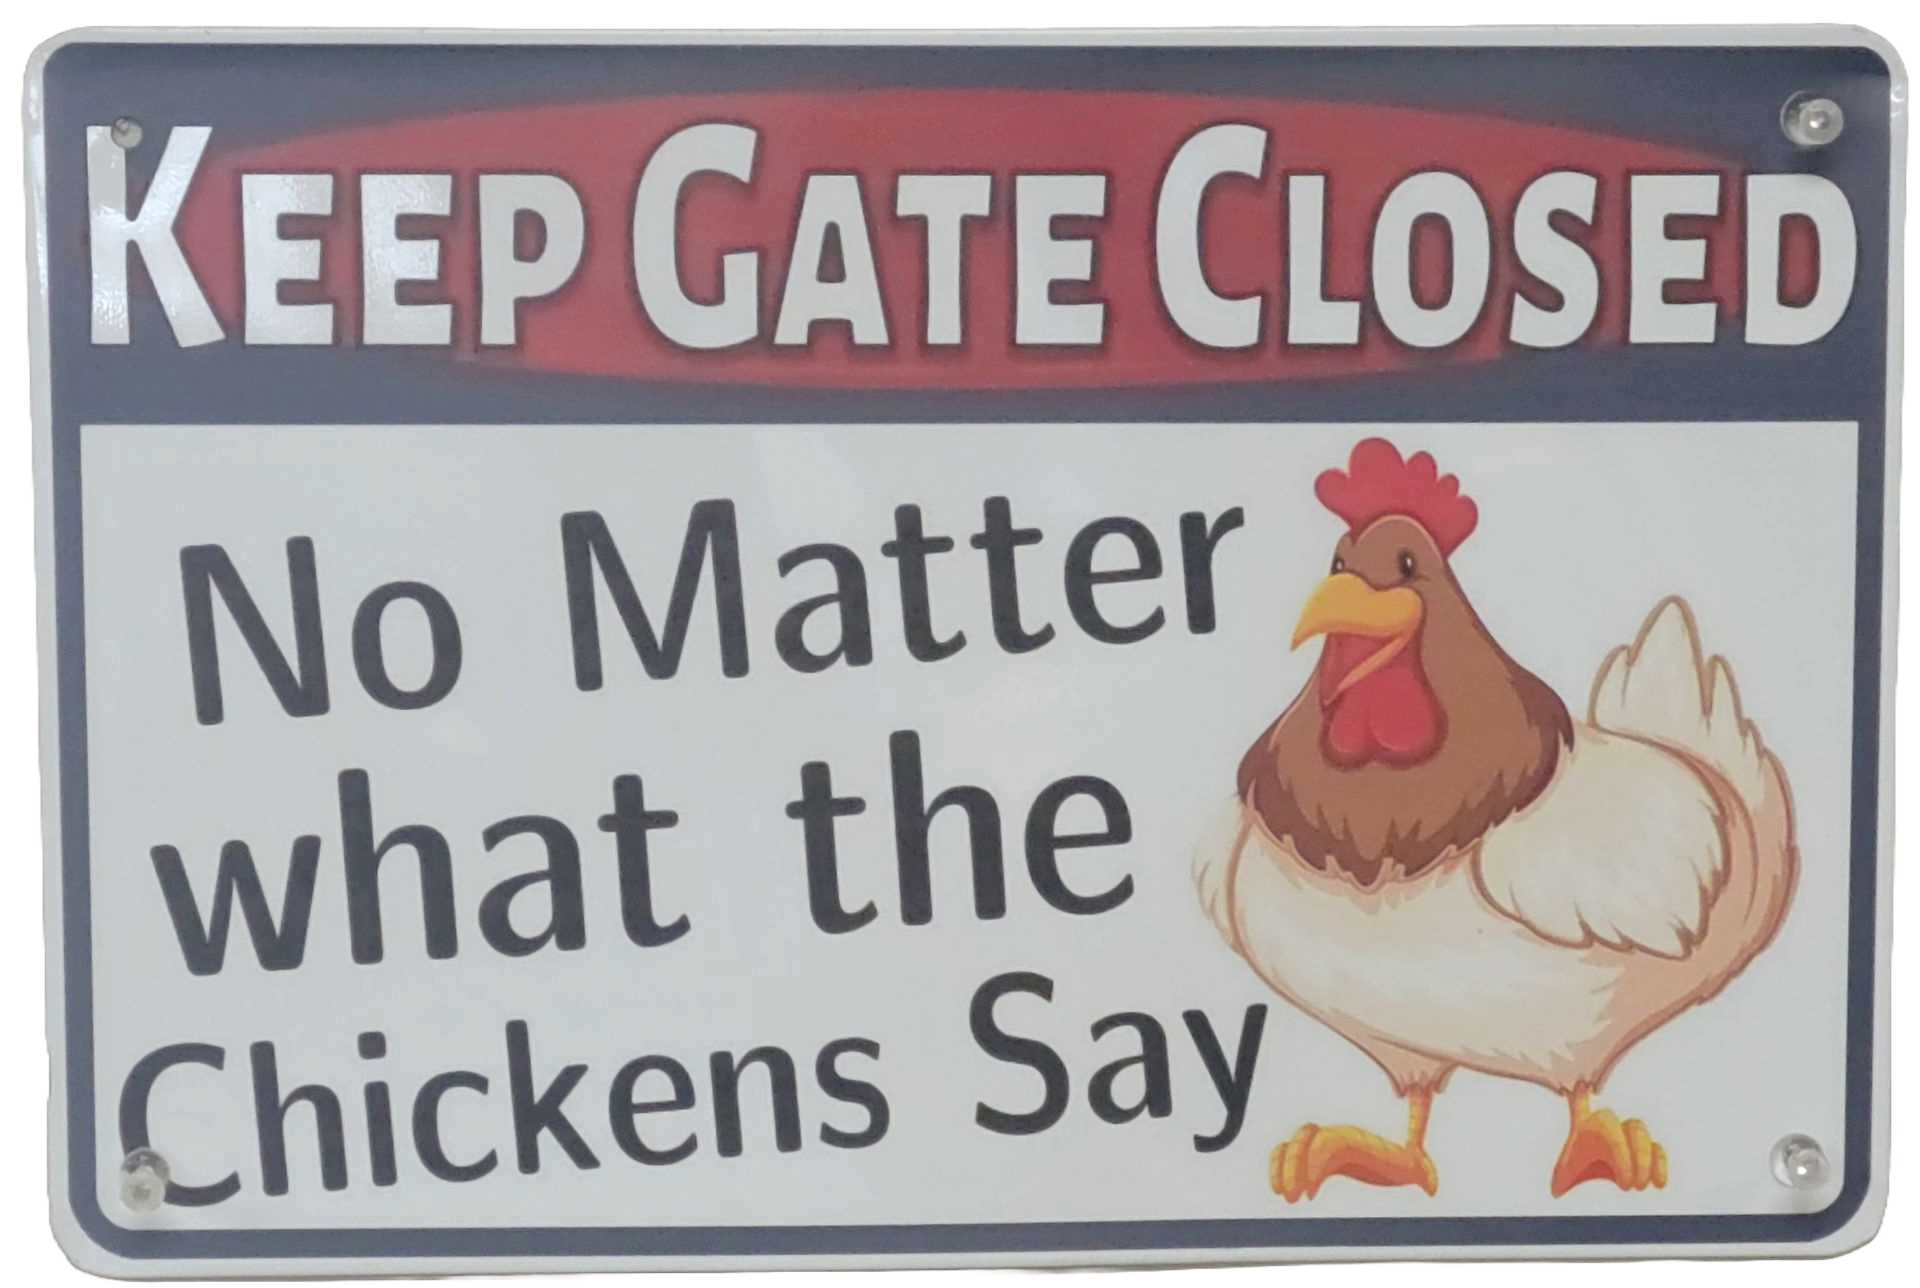 Keep Gate Closed No Matter what the Chickens Say